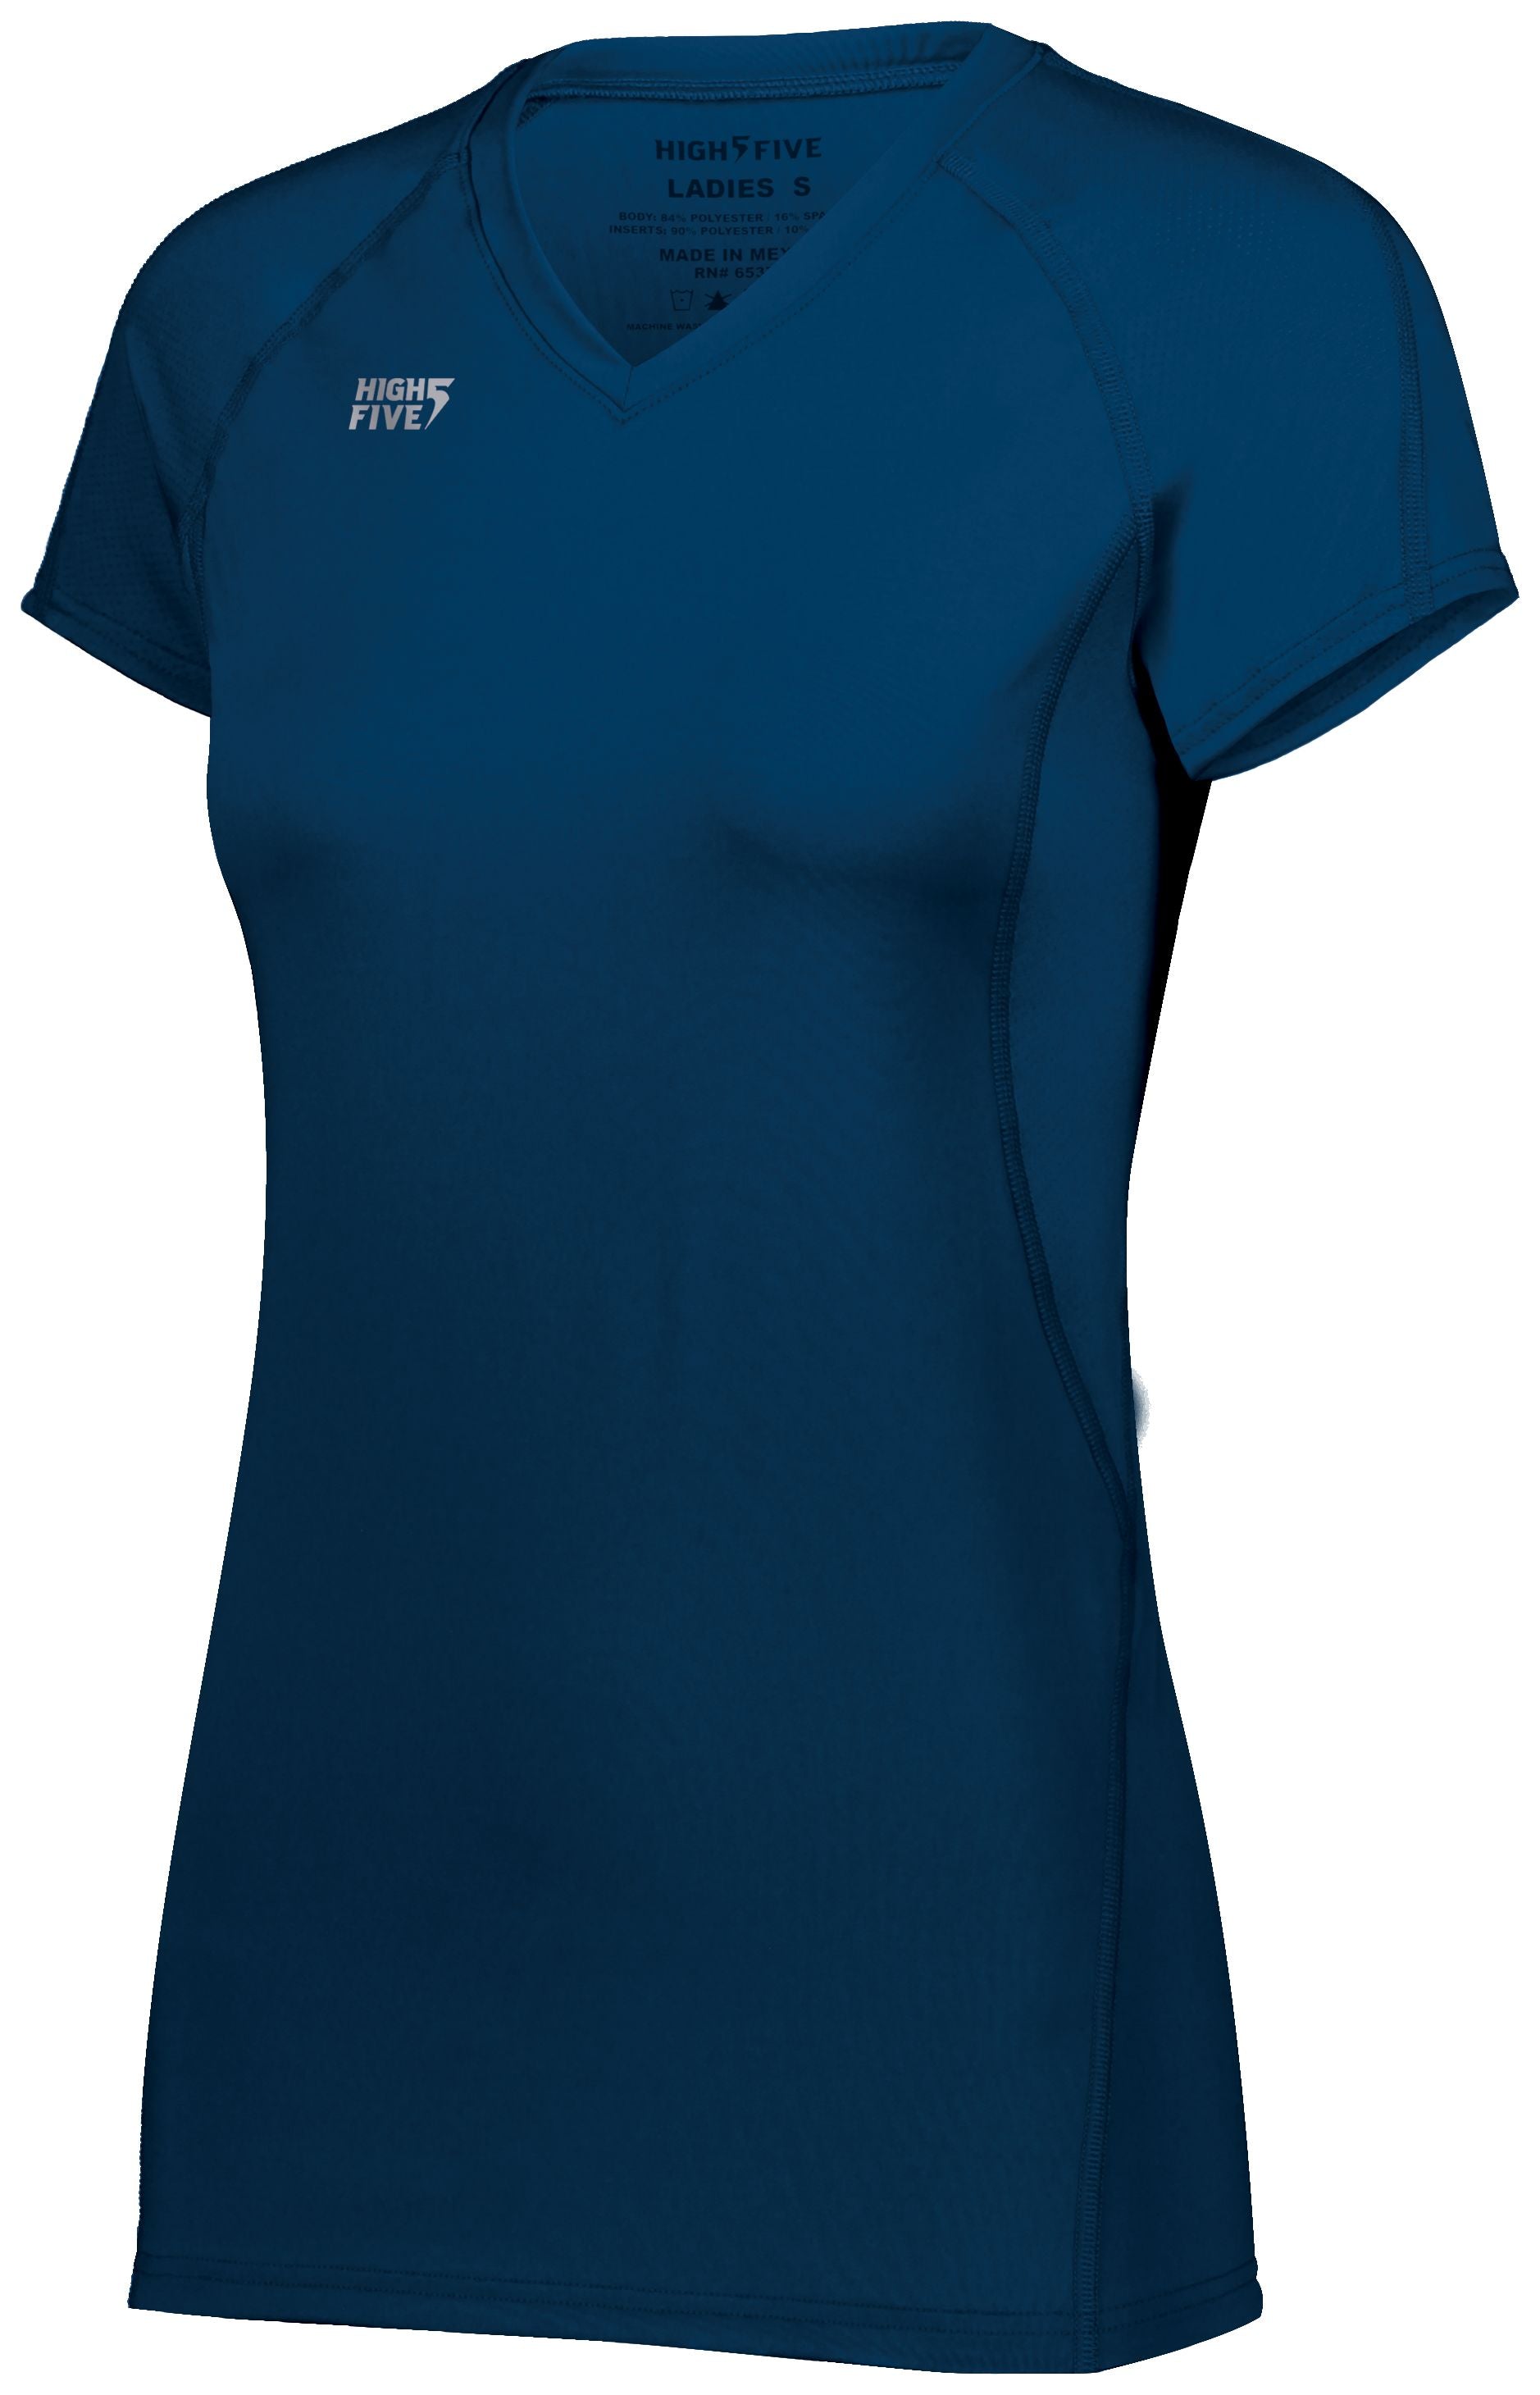 High 5 Ladies Truhit Short Sleeve Jersey in Navy  -Part of the Ladies, Ladies-Jersey, High5-Products, Volleyball, Shirts product lines at KanaleyCreations.com